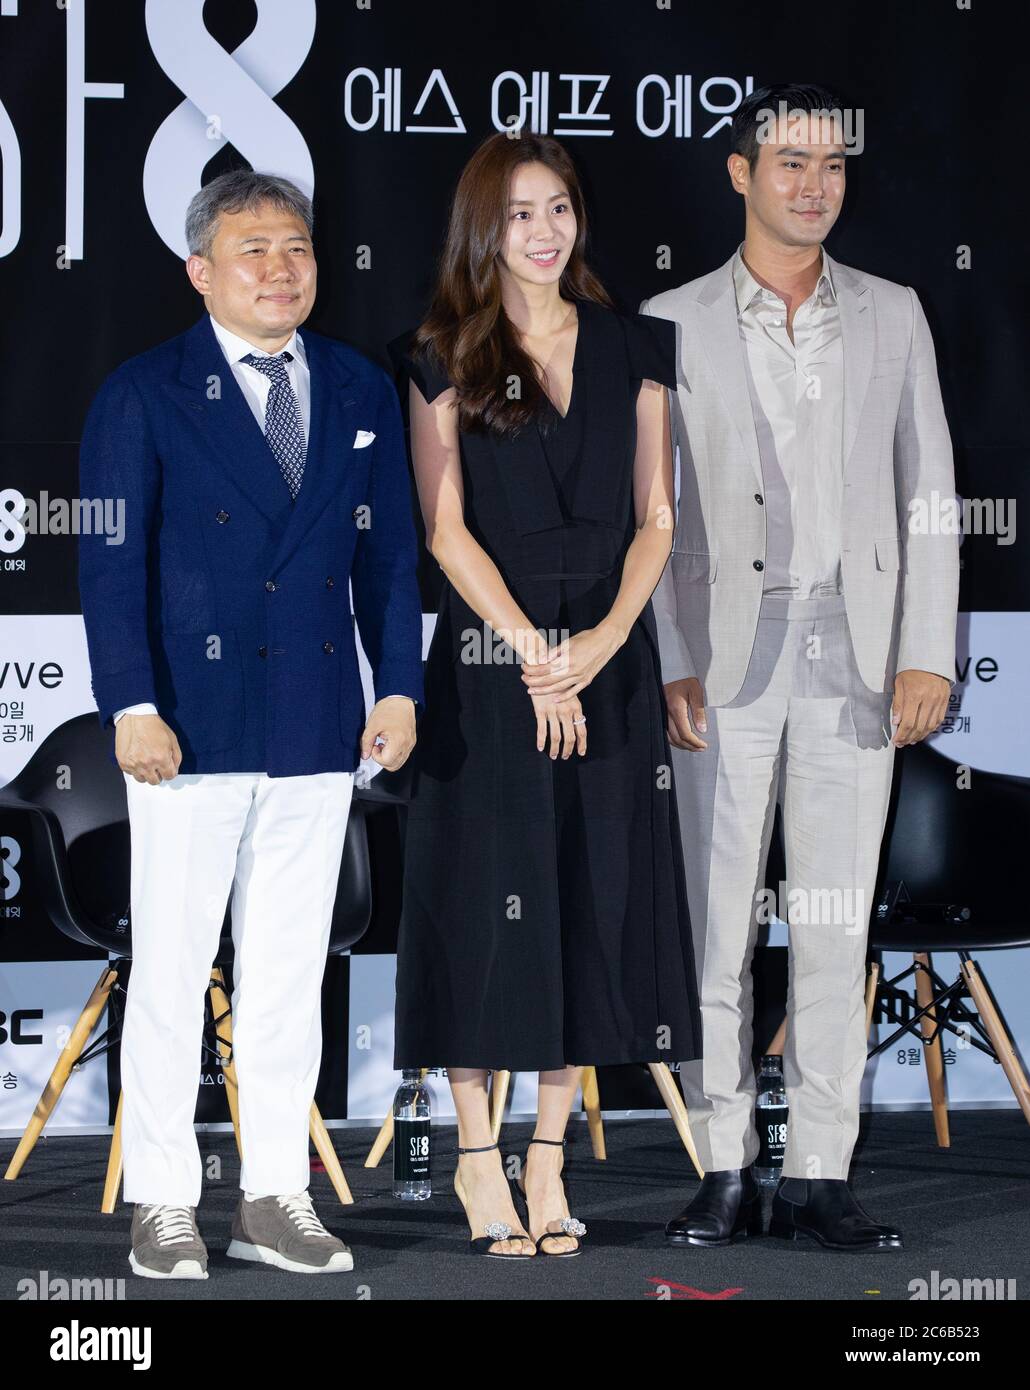 Seoul, South Korea. 8th July, 2020. (L to R) South Korean director Oh Ki-hwan and actress Uee and actor and singer Choi Si-Won (stage name: Siwon) member of South Korean boy band Super Junior attends the press conference for film 'SF8' at CGV Cinema in Seoul, South Korea on July 8, 2020. The film will be open on July 10 through the OTT platform Wavve. (Photo by Lee Young-ho/Sipa USA) Credit: Sipa USA/Alamy Live News Stock Photo